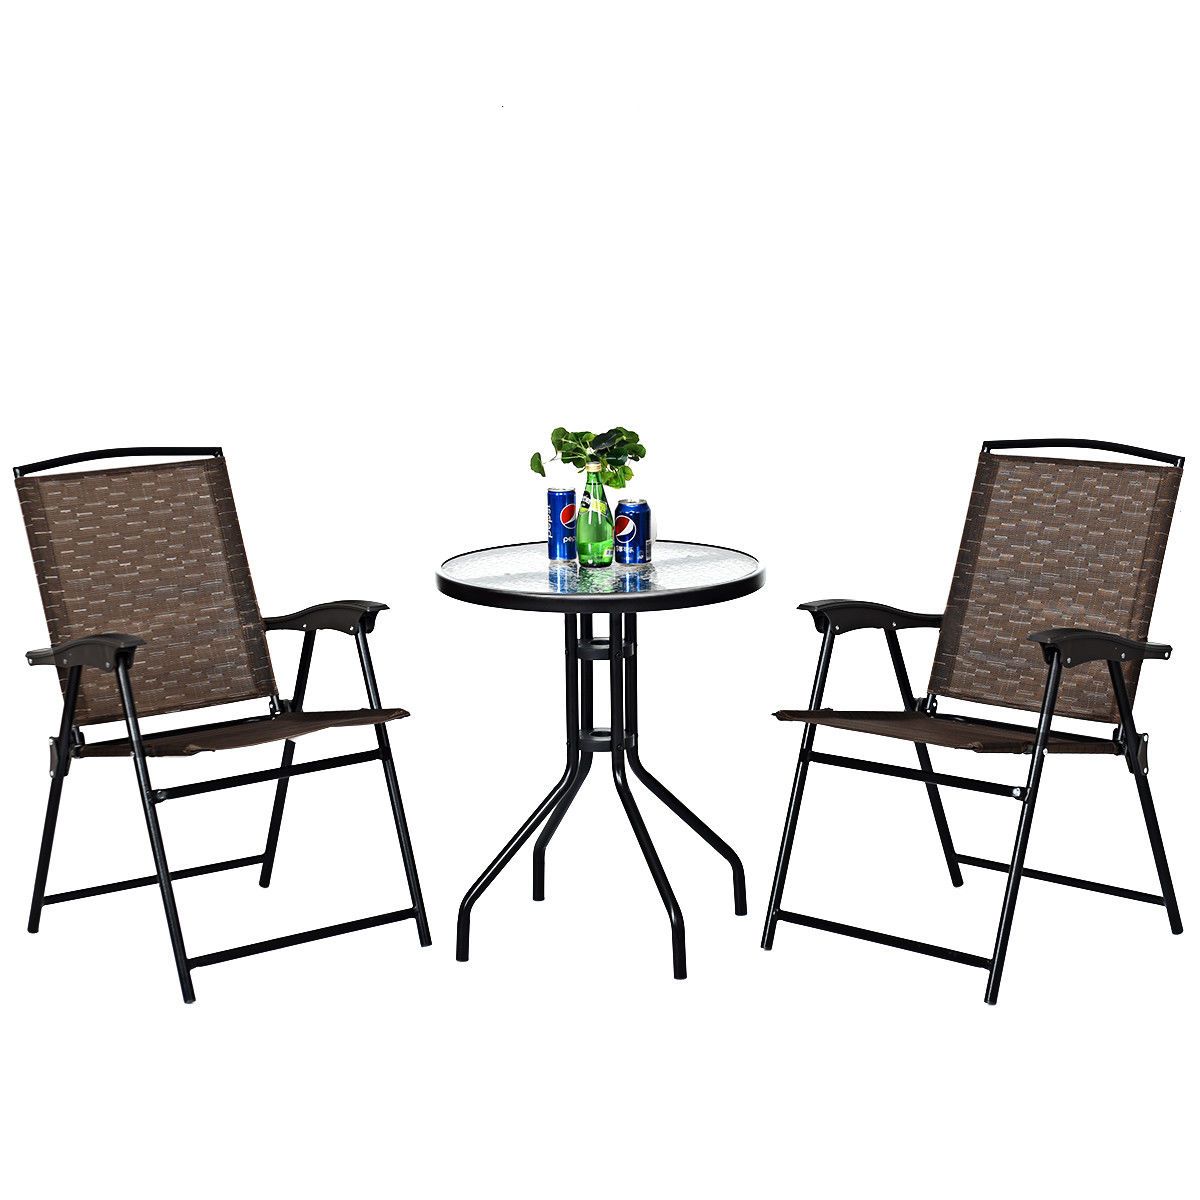 Goplus 3 Piece Folding Bistro Patio Garden Furniture Set Round Table With Regard To 3 Piece Outdoor Table And Chair Sets (View 8 of 15)